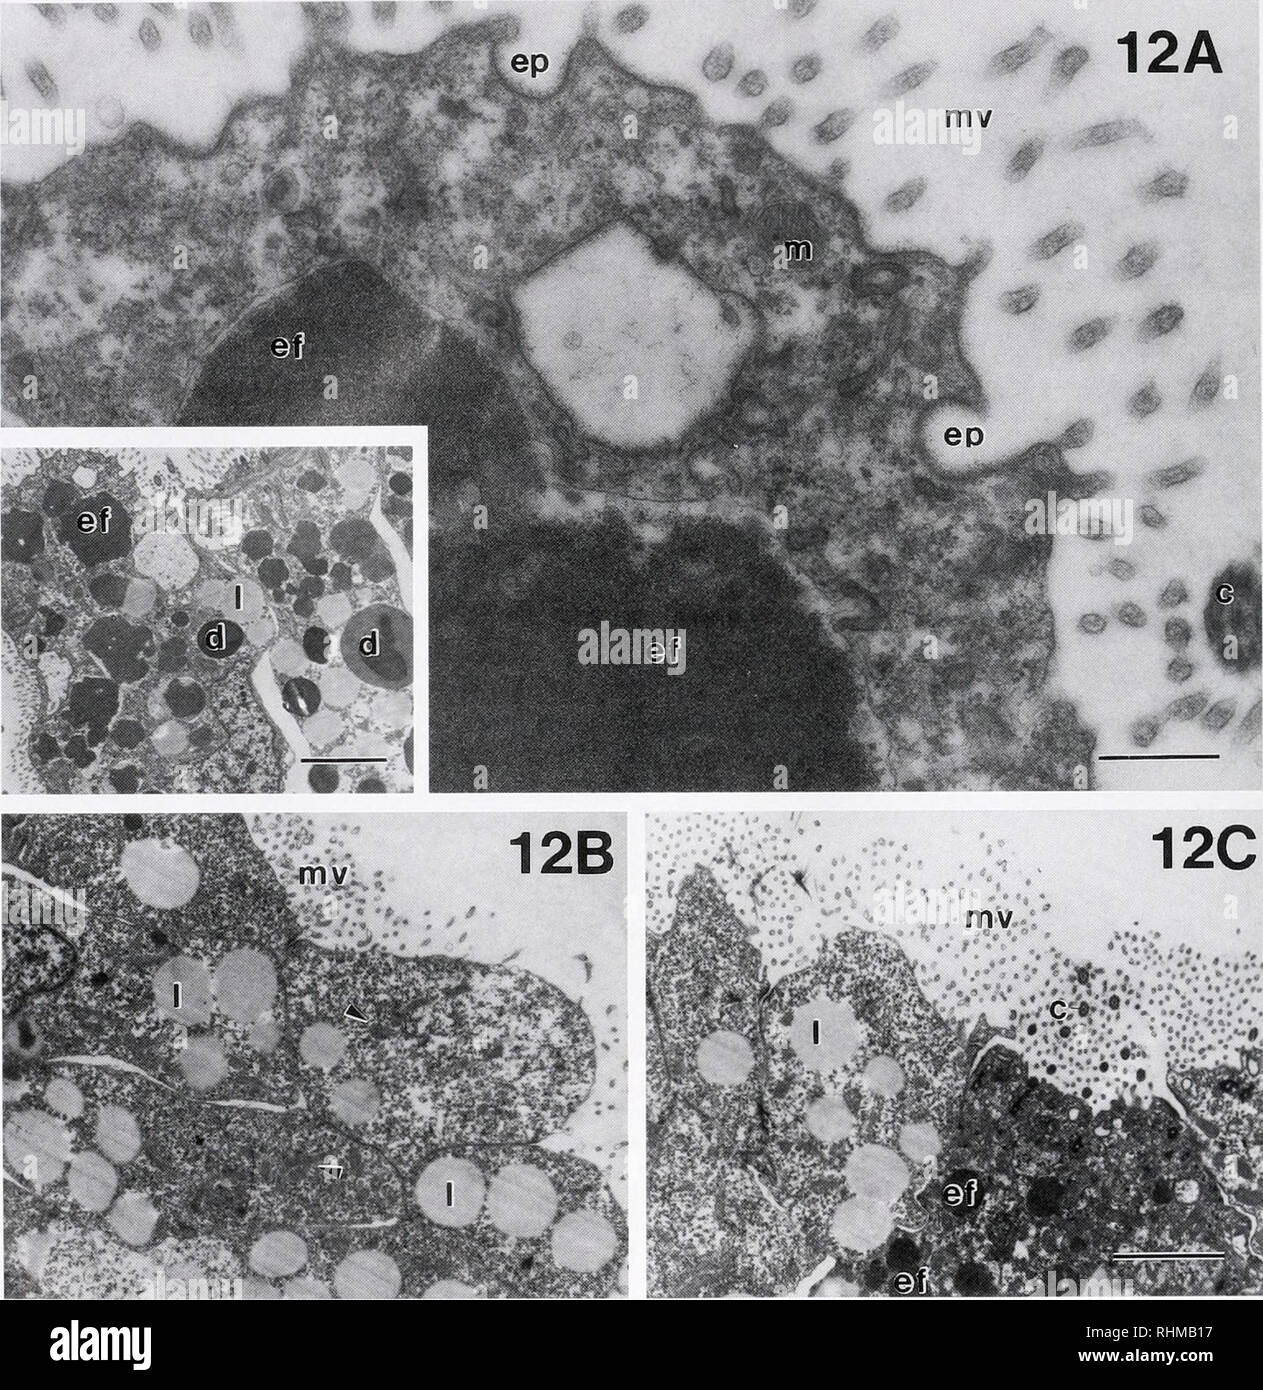 . The Biological bulletin. Biology; Zoology; Biology; Marine Biology. 238 A. L. MORAN 12A mv. Figure 12. Transmission electron micrographs of sections from the velum and foot of Littorina sitkana larvae exposed to ferritin for 12 h. (A) High-magnification view of cell surface of a prototrochal cell of the velum, showing a prototrochal ciliuni, surface microvilli, a mitochondrion, and an endosome containing electron-dense material (ferritin). Two endocytotic profiles are evident at the cell surface membrane. Inset; lower magnification view of the same area of the larva. Magnified area shown in  Stock Photo